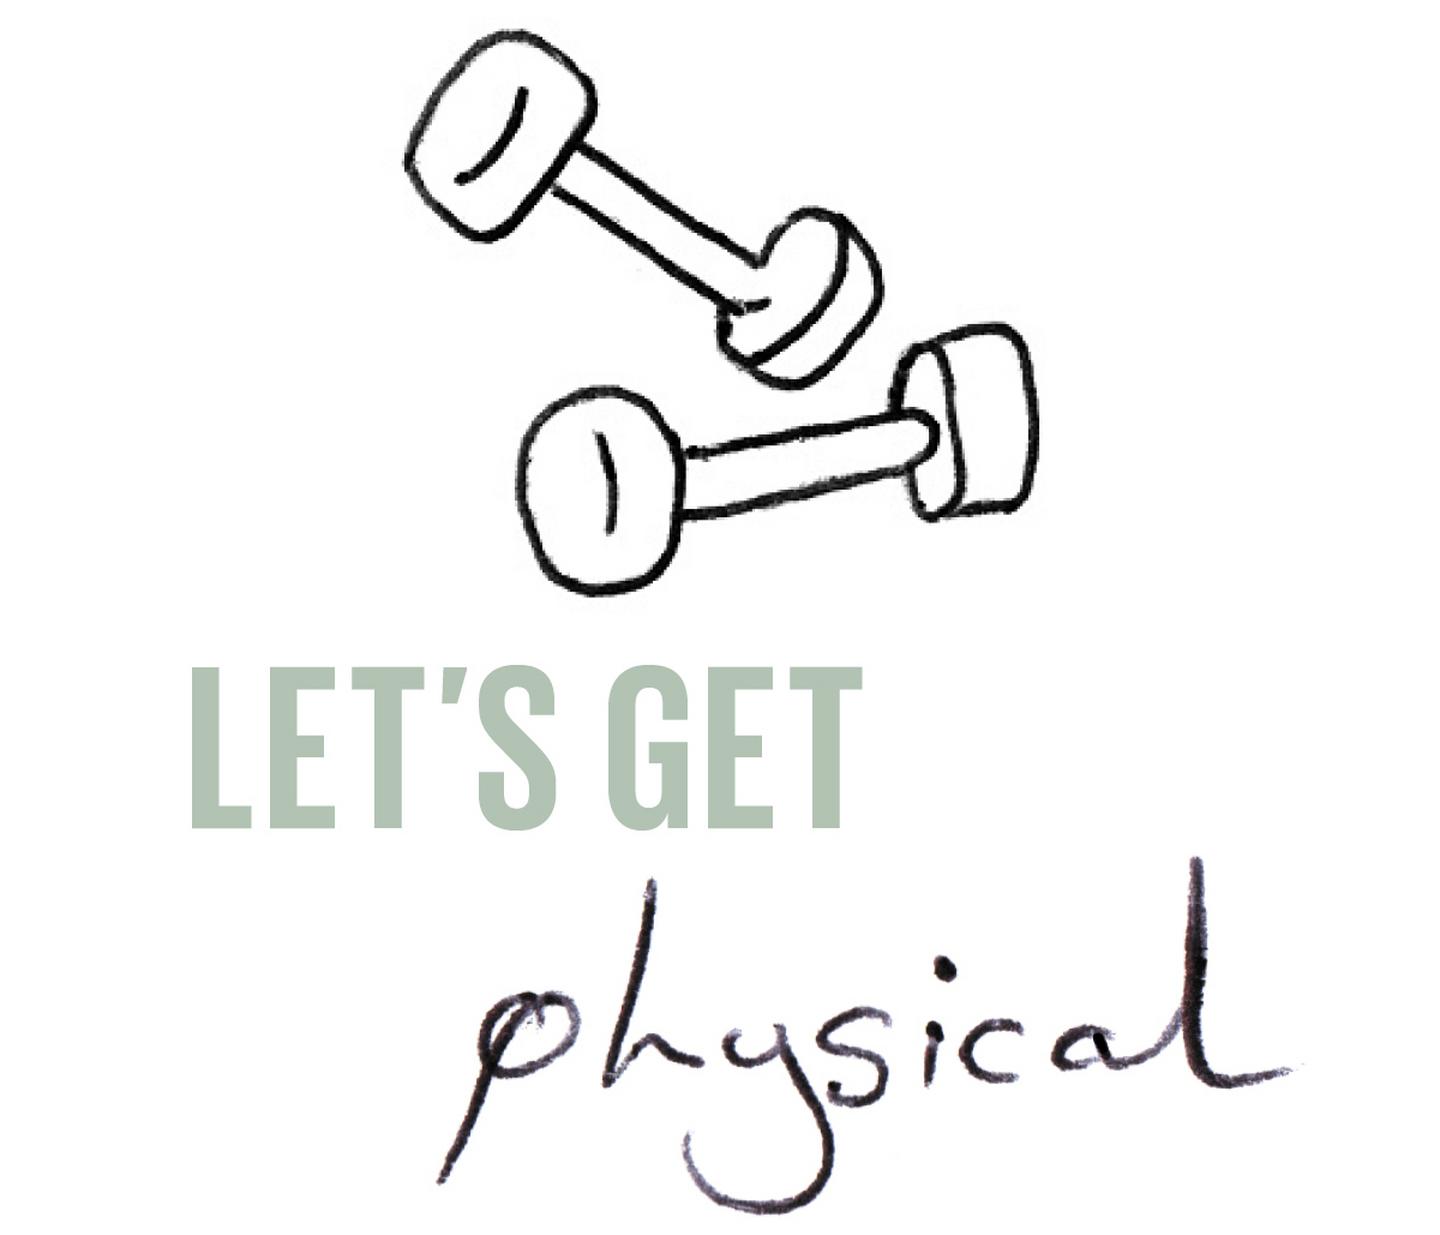 Let's get physical.